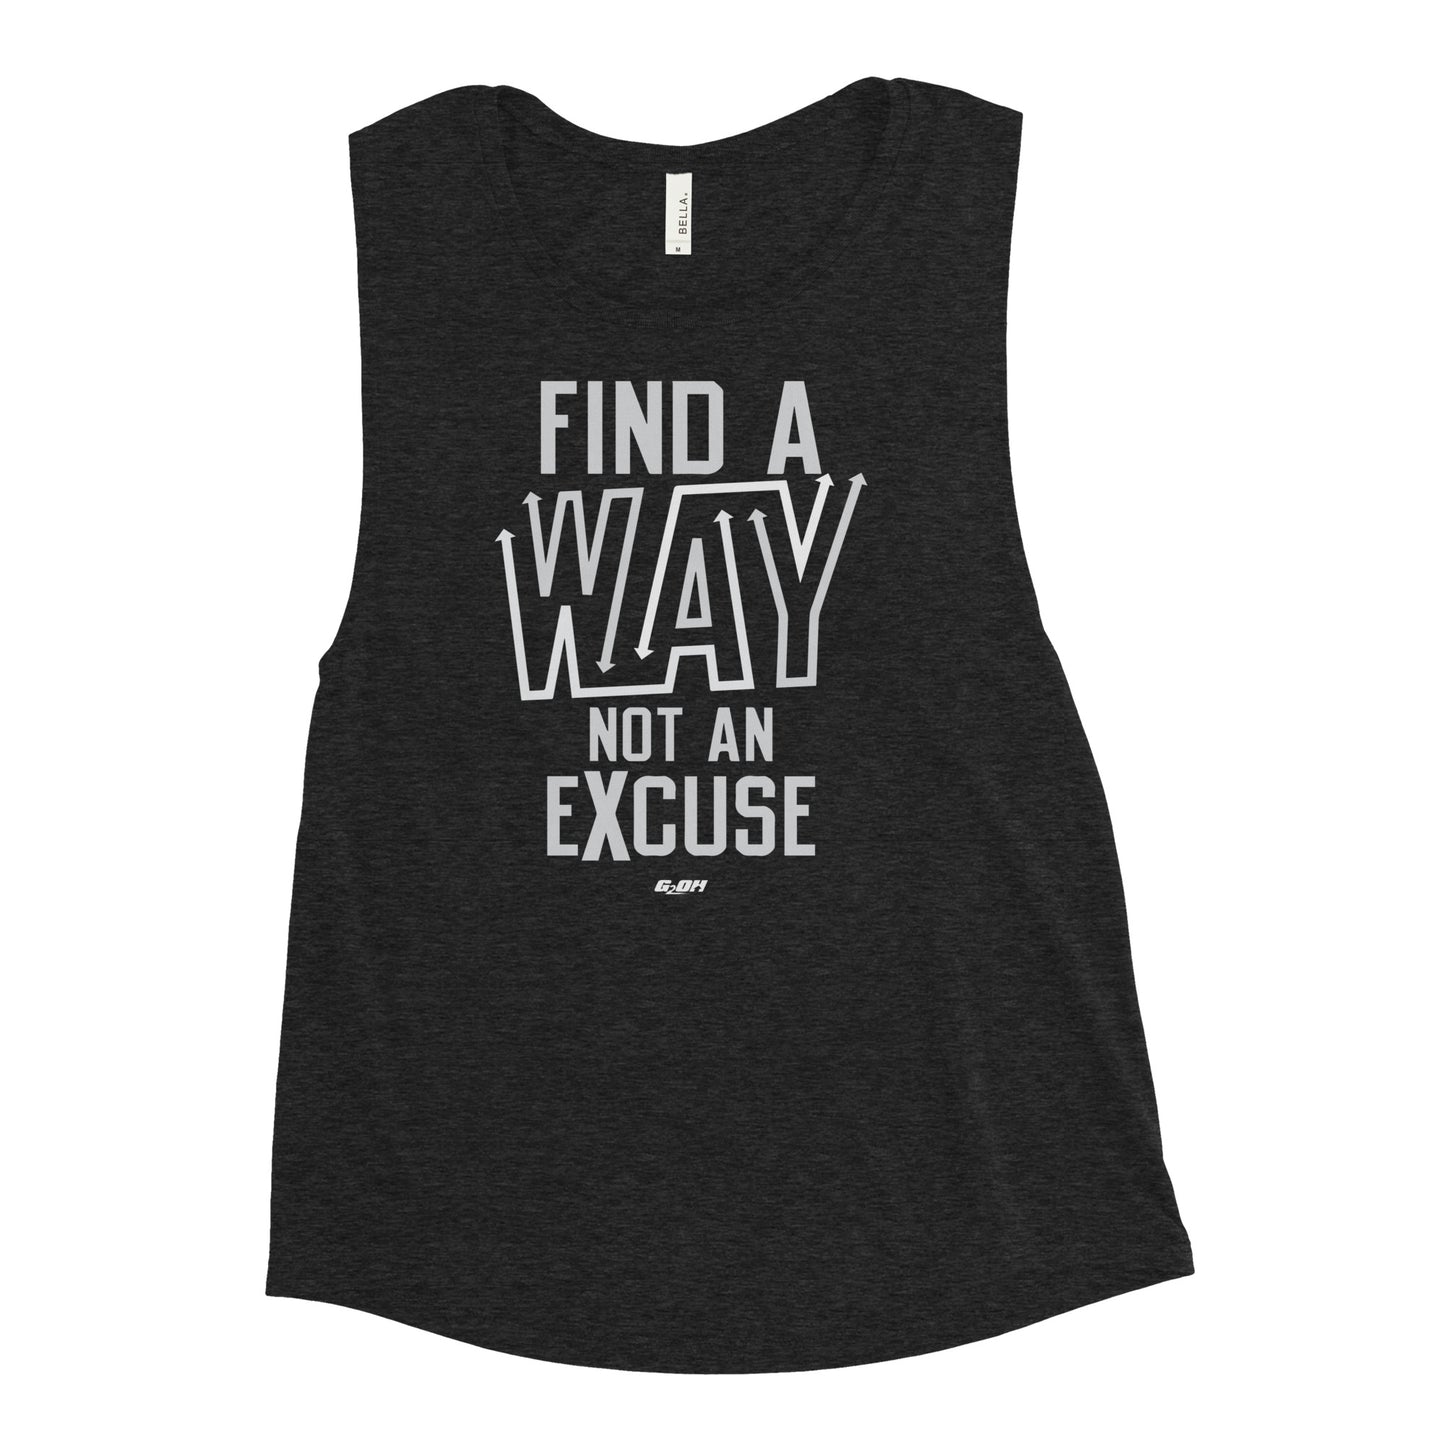 Find A Way, Not An Excuse Women's Muscle Tank